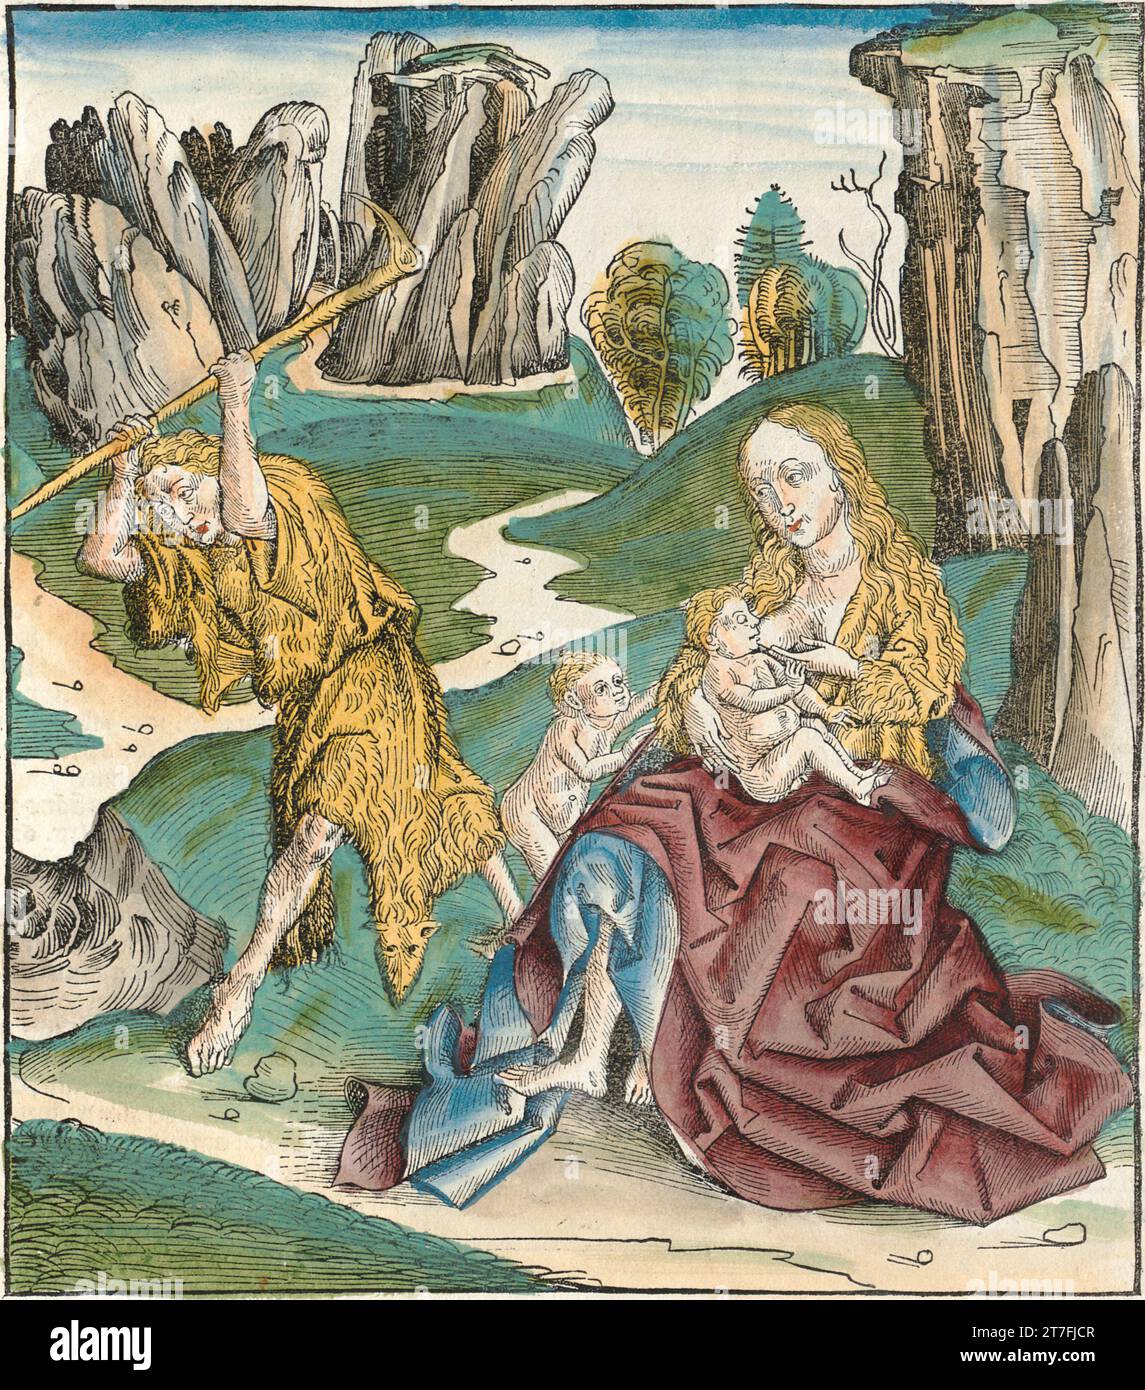 Adam and Eve raising Cain and Abel - Illustration from The Nuremberg Chronicle, 1493. Illustrated by Wilhelm Pleydenwurff and Michael Wolgemut Stock Photo